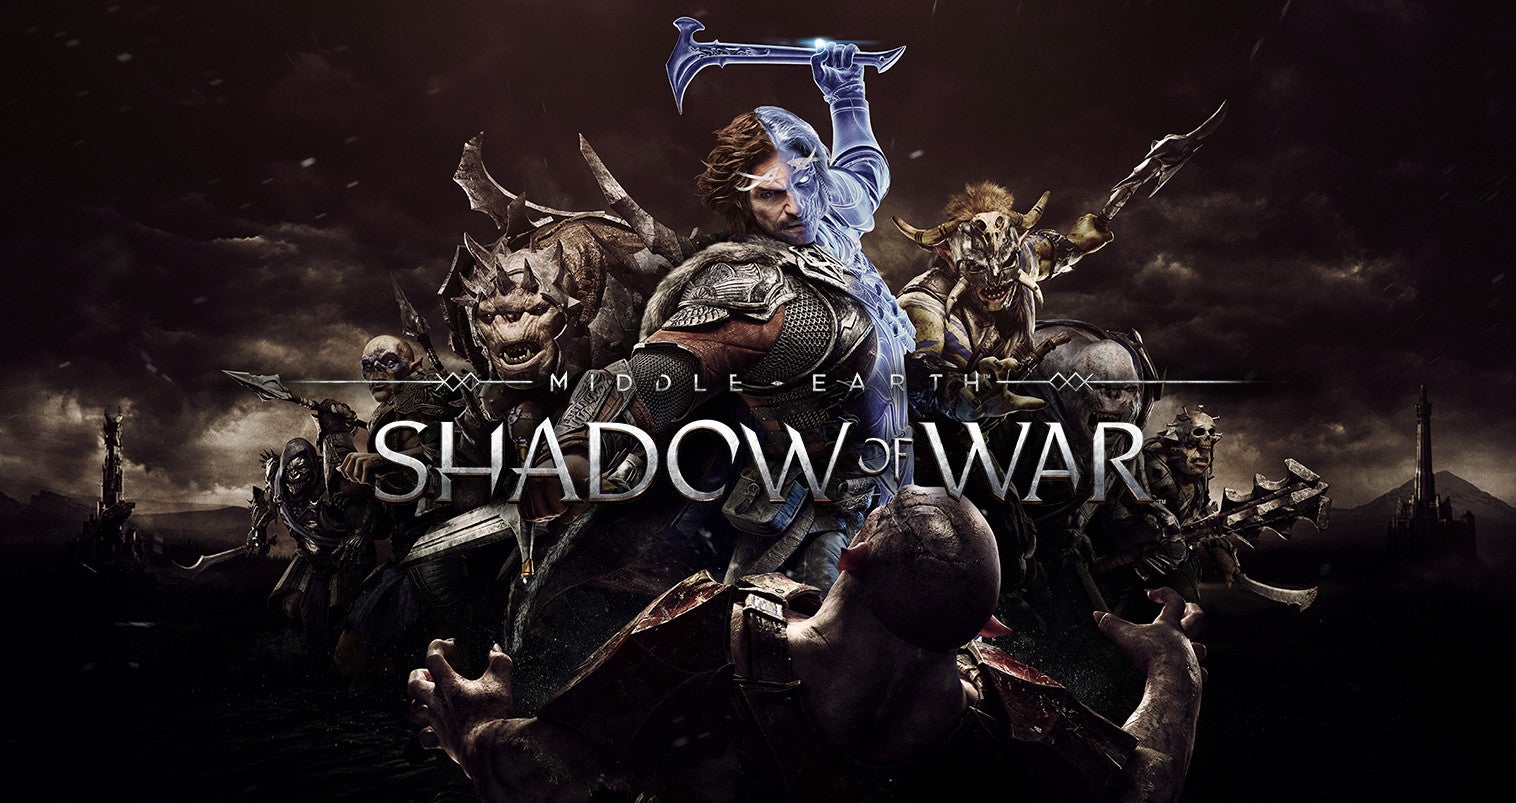 Middle-earth: Shadow of War for Android and iOS released to mixed reviews